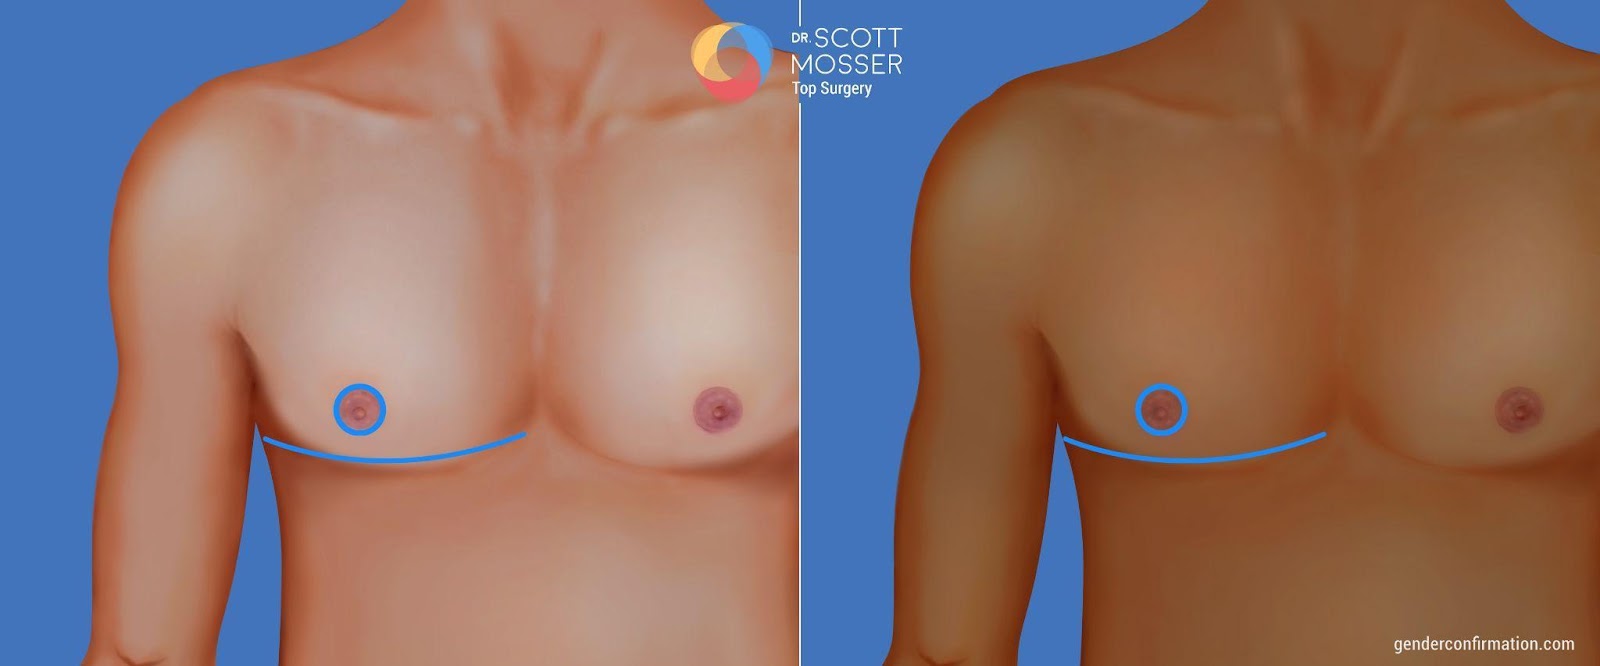 Buttonhole incision for top surgery or breast reduction